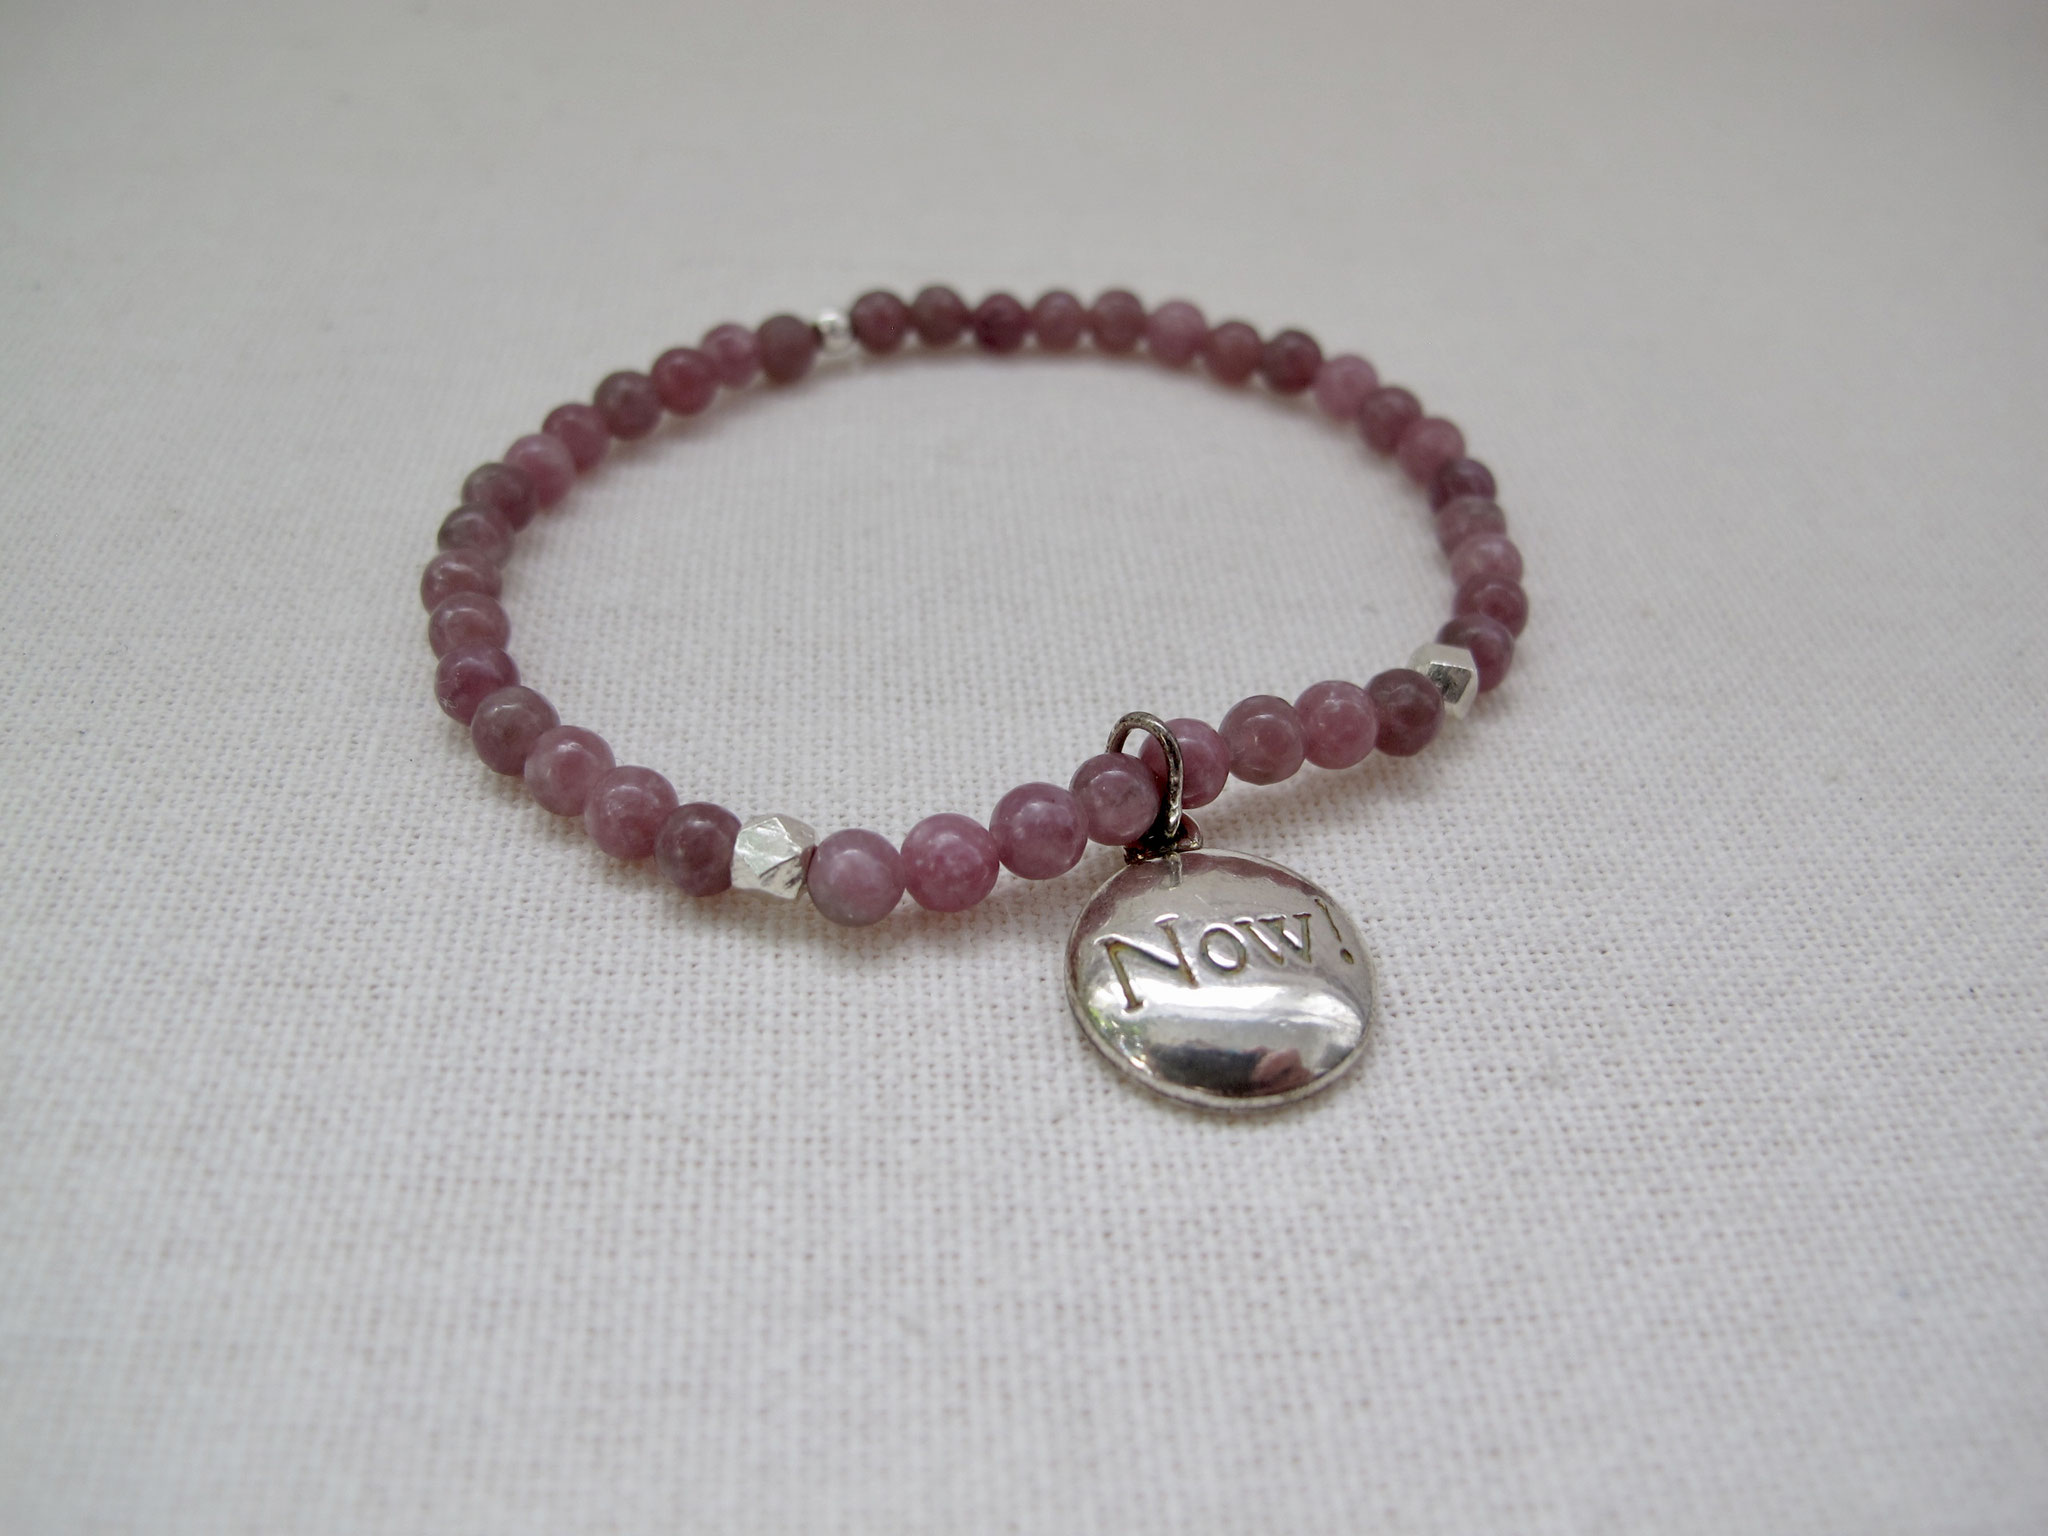 Purple tourmaline with 925 Sterling silver charm ("Now") and elements (sold)